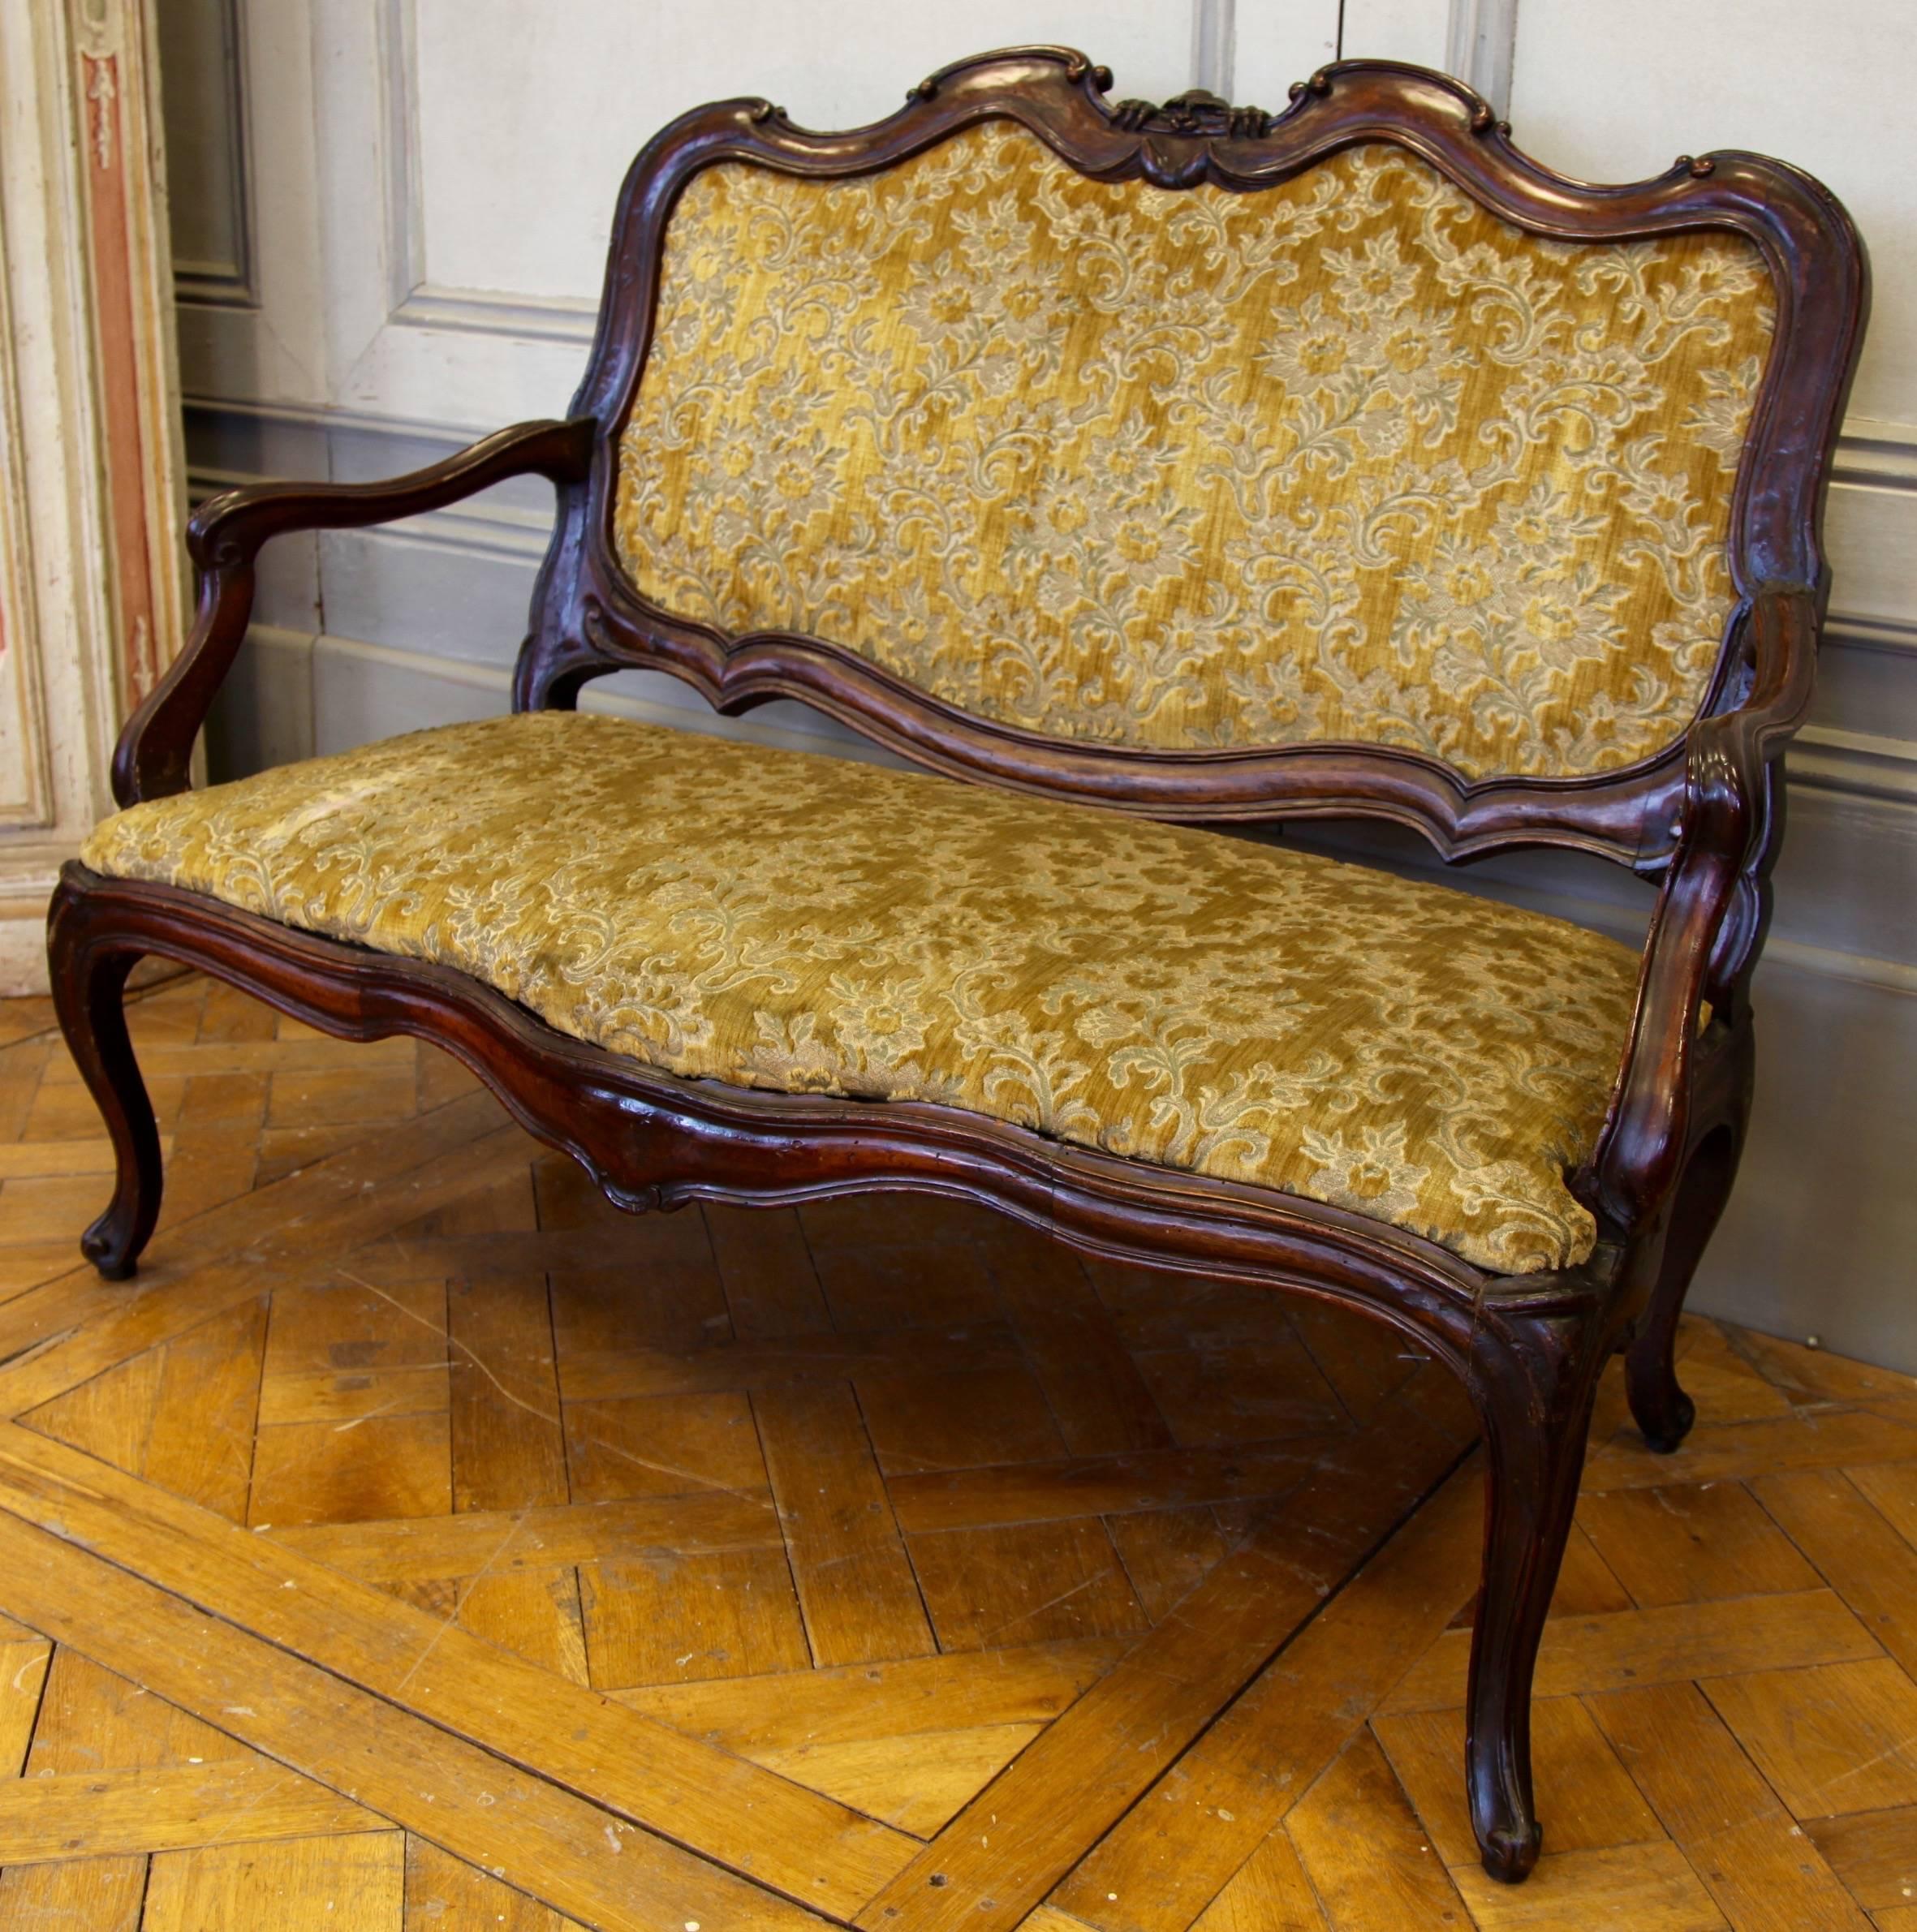 Beautiful 18th century Italian sofa in carved walnut. Has the detail of an impish sprite in the carving at the centre of the backrest which, typical of its period, would have been a talisman for protection. Upholstered in a golden velvet damask.